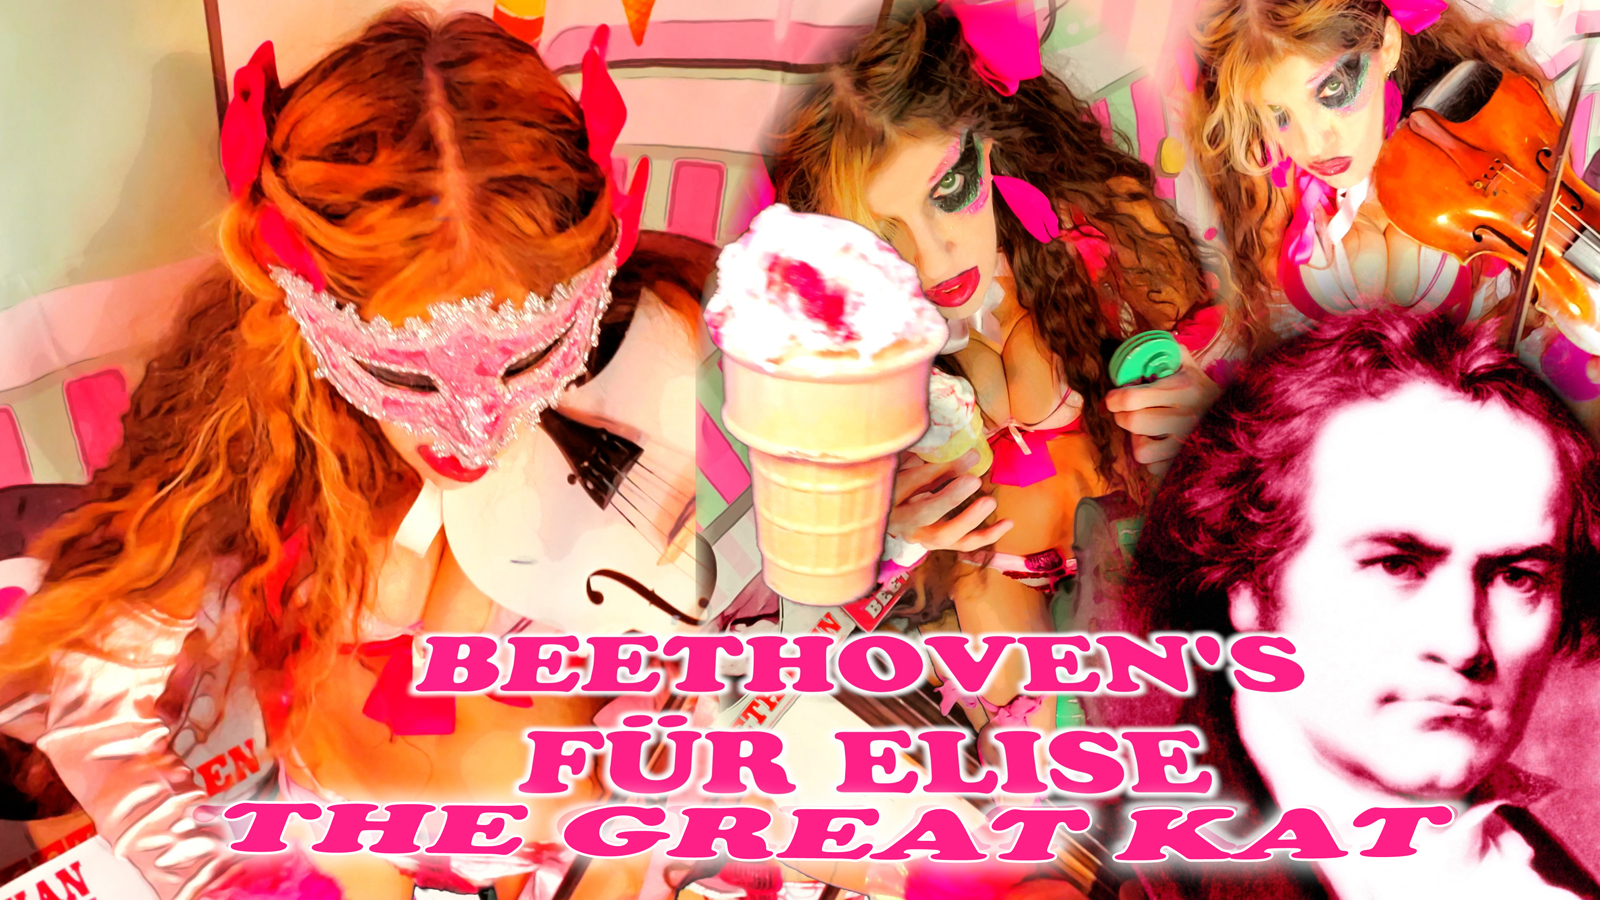 New SEX & VIOLINS: BEETHOVEN'S FR ELISE 22ND CENTURY Music Video & Single by THE GREAT KAT VIOLIN GODDESS!